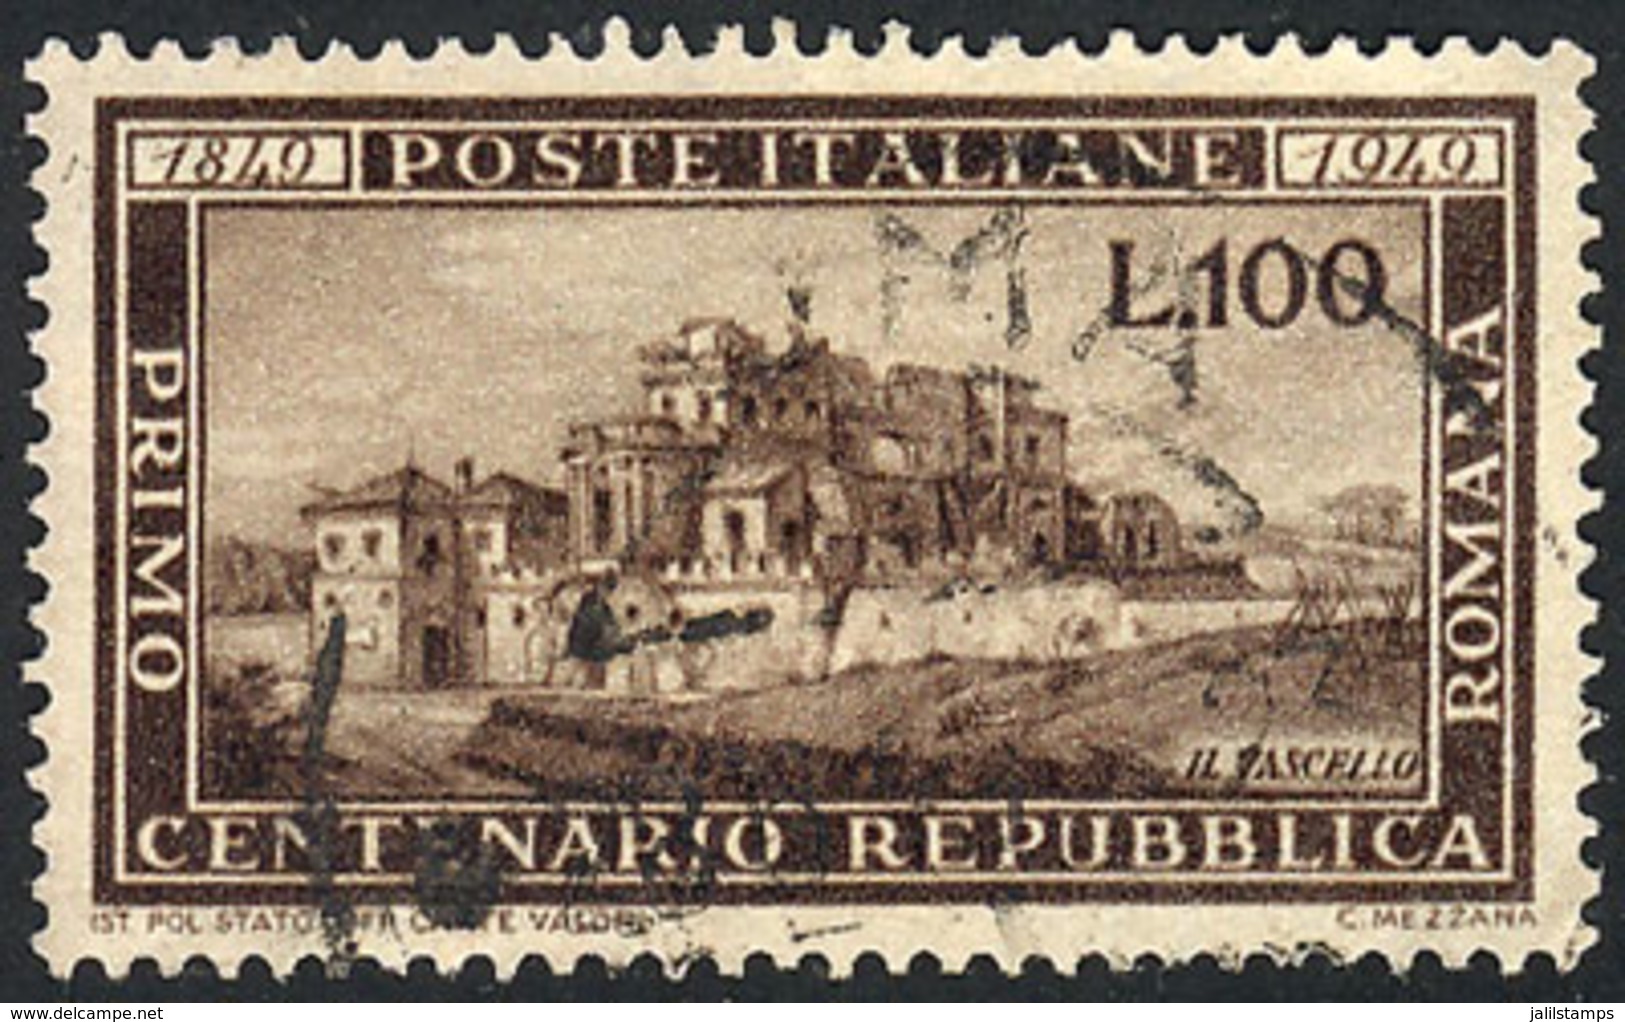 ITALY: Sc.518, 1949 Centenary Of The Republic, Used, VF Quality, Catalog Value US$125. - Ohne Zuordnung